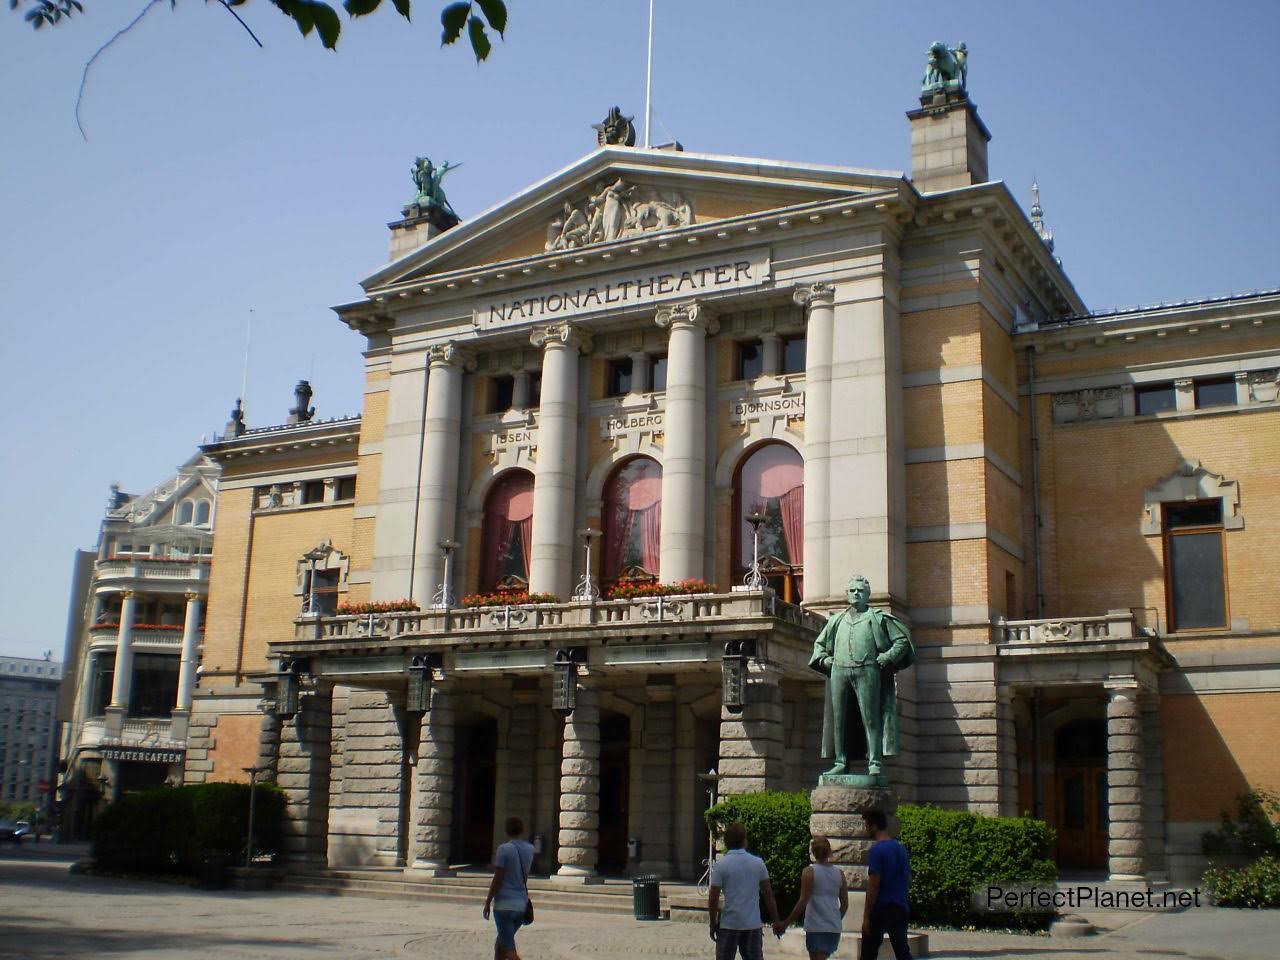 Oslo National Theater